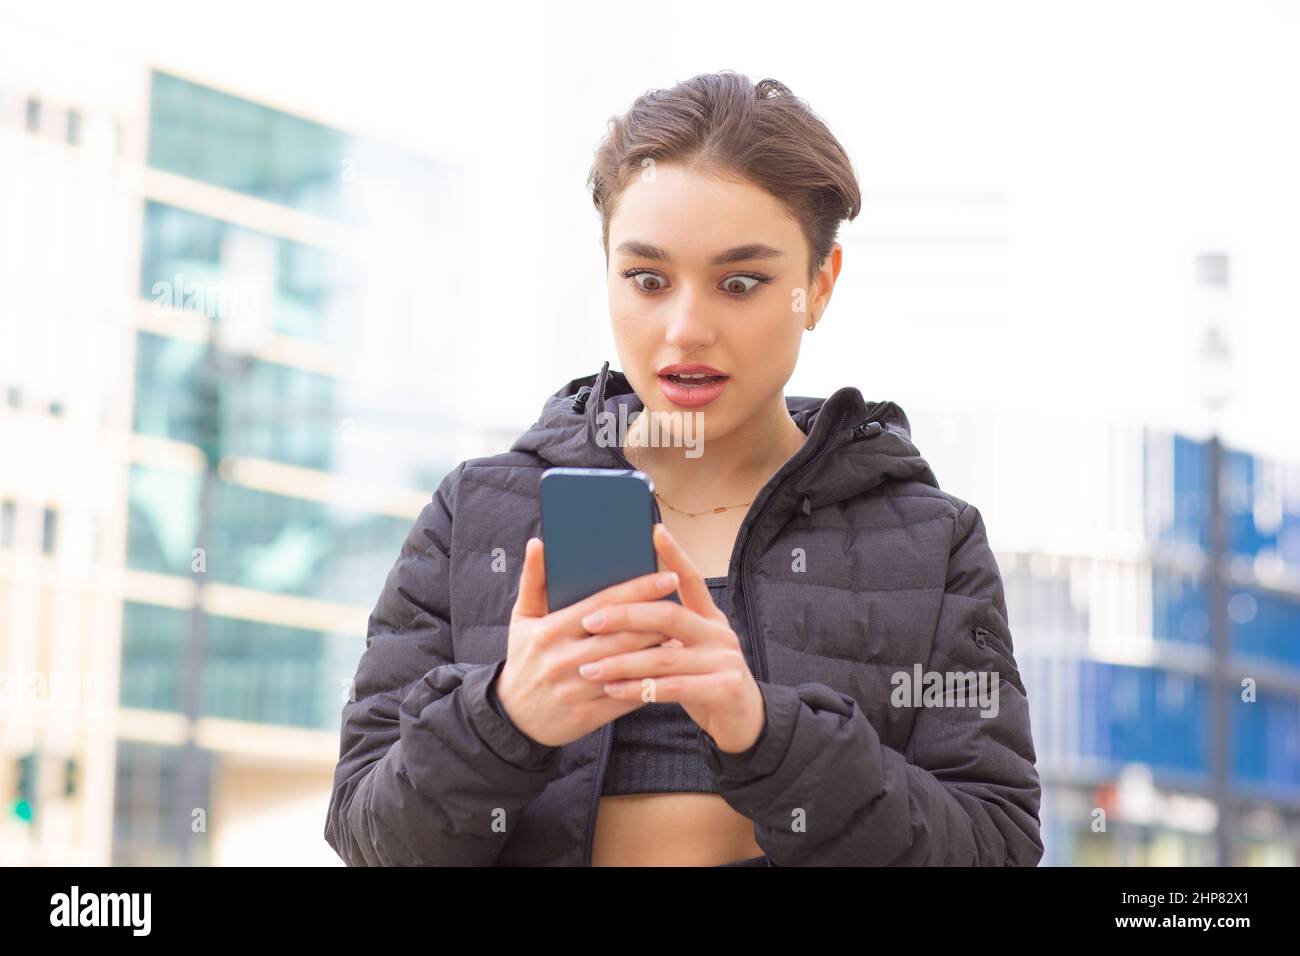 Portrait of an amazed woman looking at her cell phone on a city background Stock Photo